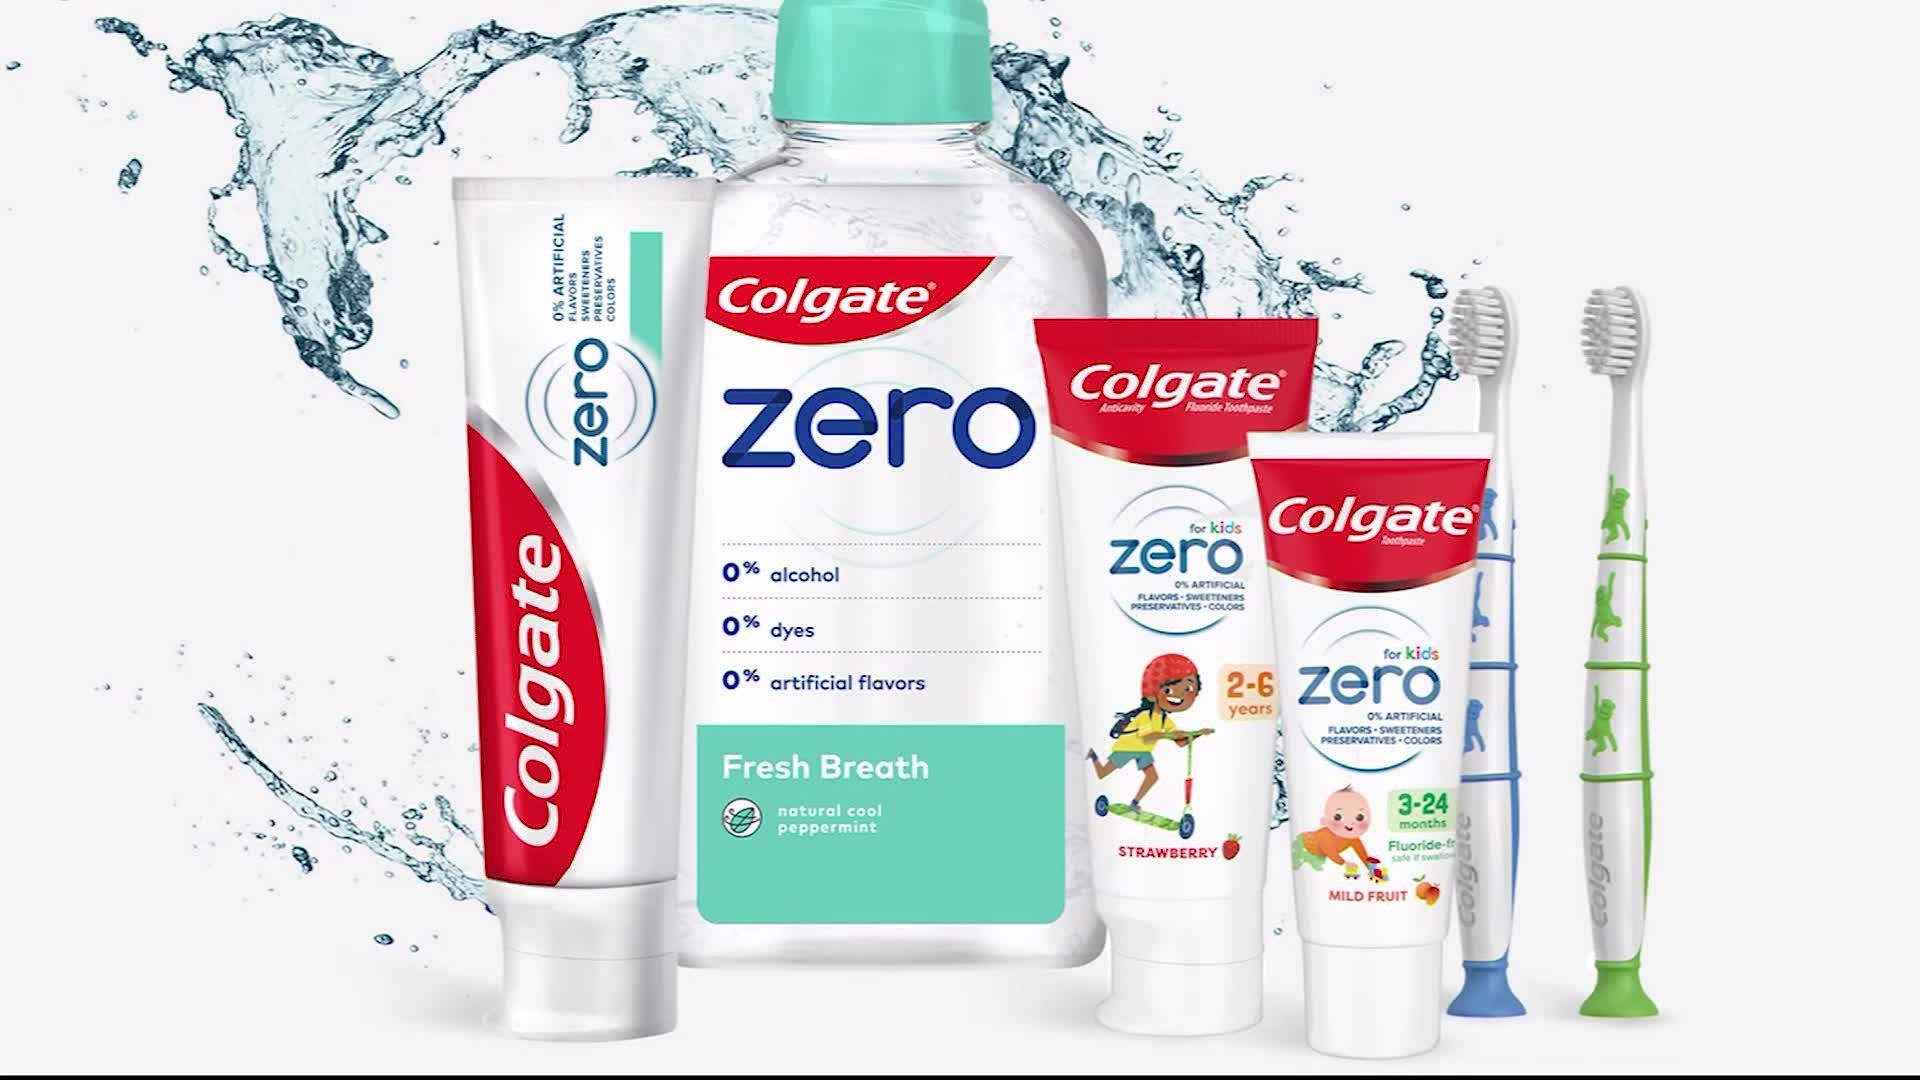 Colgate unveiled a new line of organic, vegan, and gluten-free products with no preservatives, artificial flavors, sweeteners, or colors.
Colgate-Palmolive announced its Colgate Zero line Monday. It includes toothpaste, including one specifically for children, as well as mouthwash and toothbrushes.
It appears to take aim at the same younger, more health- and eco-conscious demographic that buys from niche, smaller competitors like Tom's of Maine and Doctor Bronner's. It may also help colgate better compete with its largest competitor, Procter and Gamble, which makes crest products. P&G owns Burt's Bees Purely White and Native Toothpaste, which is a natural brand.